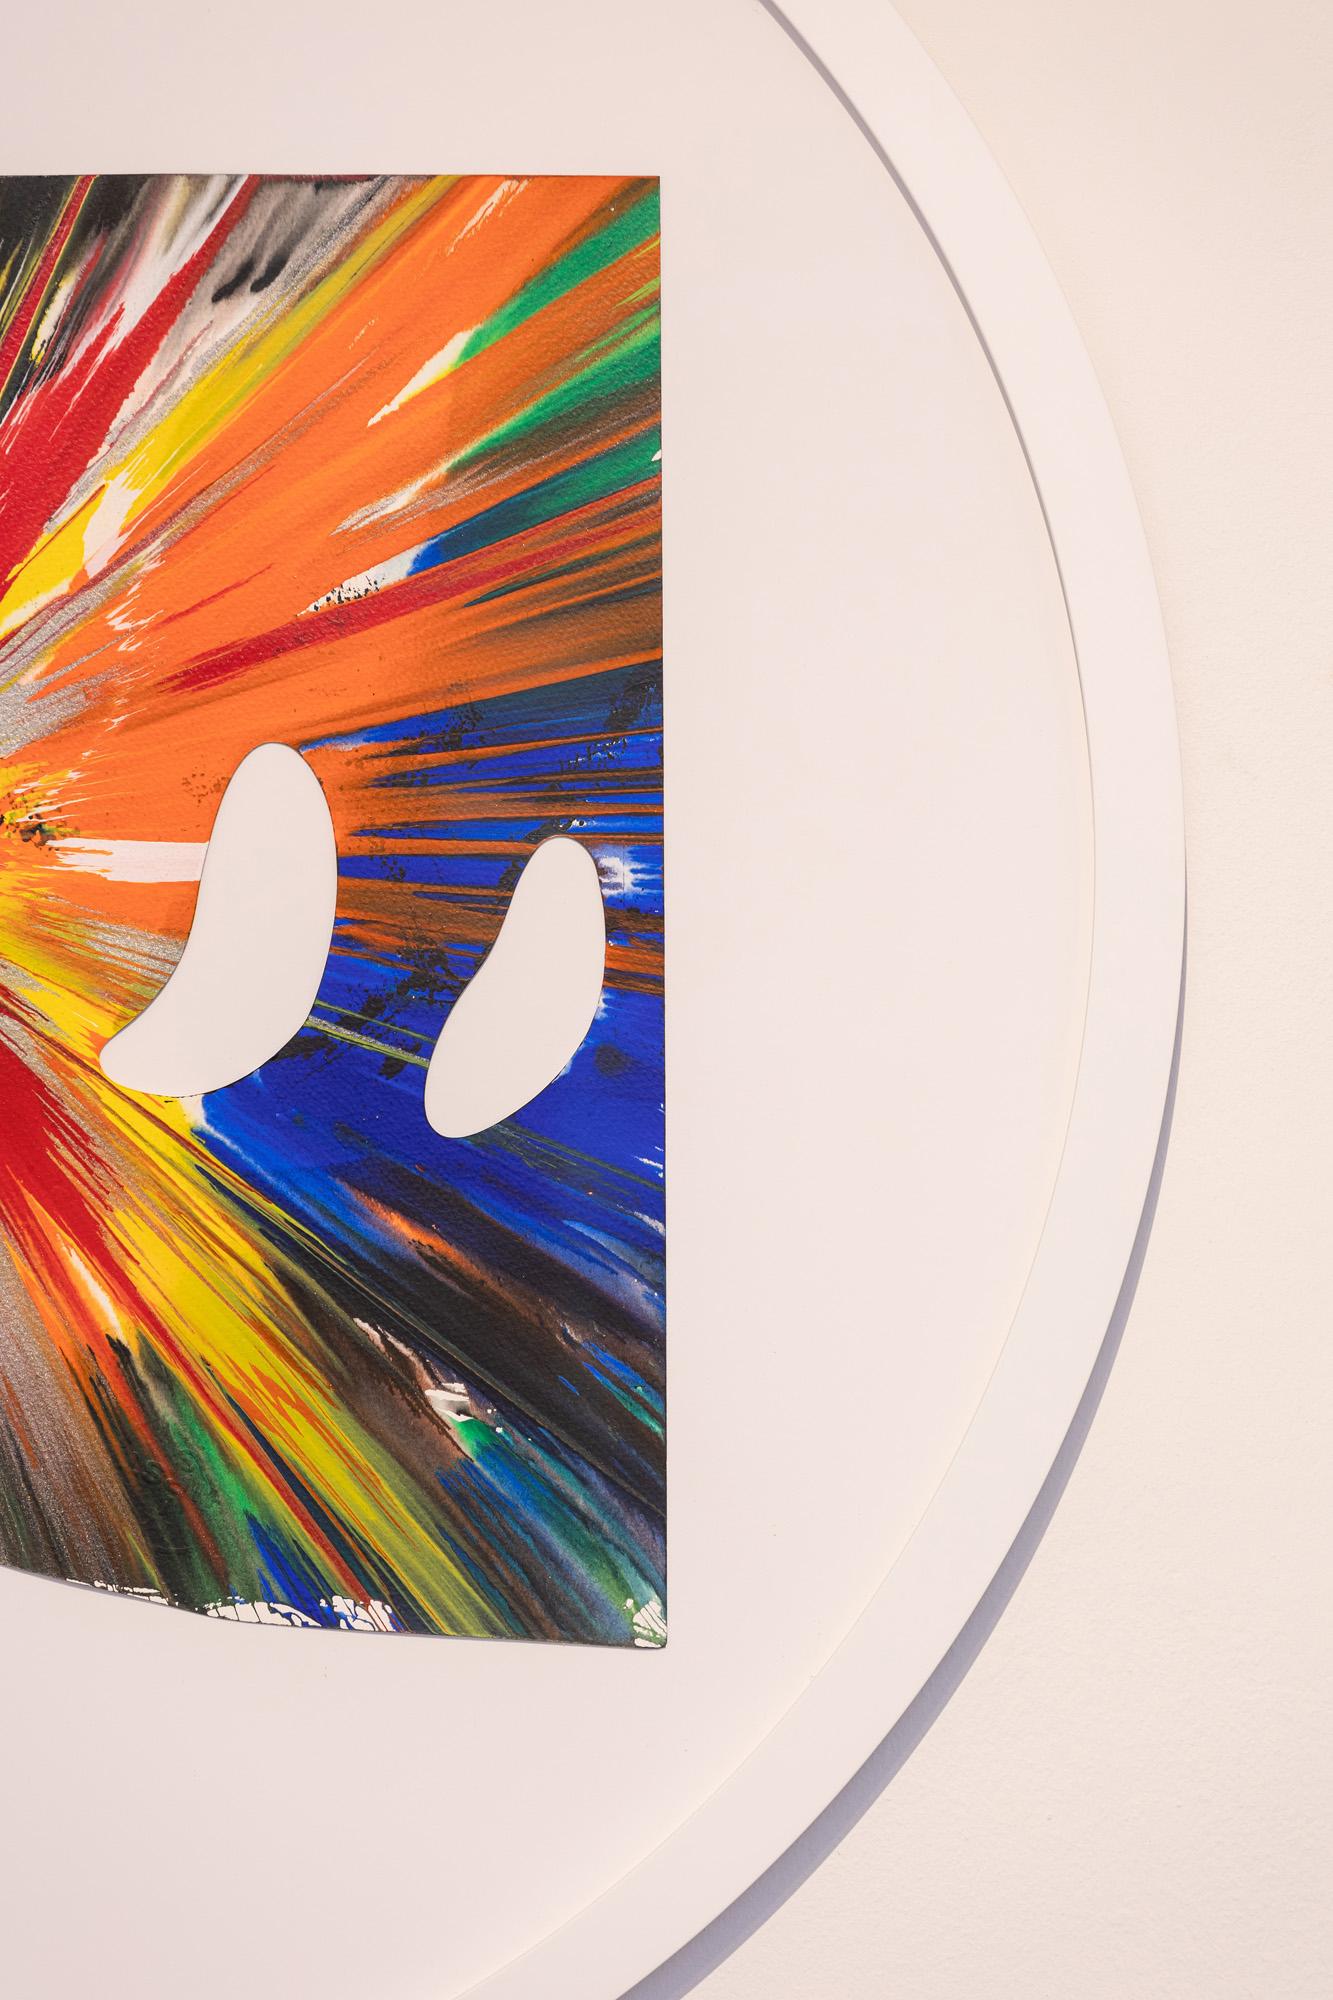 Acrylic on paper. 2009.
48.9 × 67.3 cm
94 x 94 cm (framed)

A mesmerizing Damien Hirst Spin painting with explosions of vivid color amidst the timeless, mysterious form of a shark. This Damien Hirst Spin painting originates from Hirst’s ‘Spin